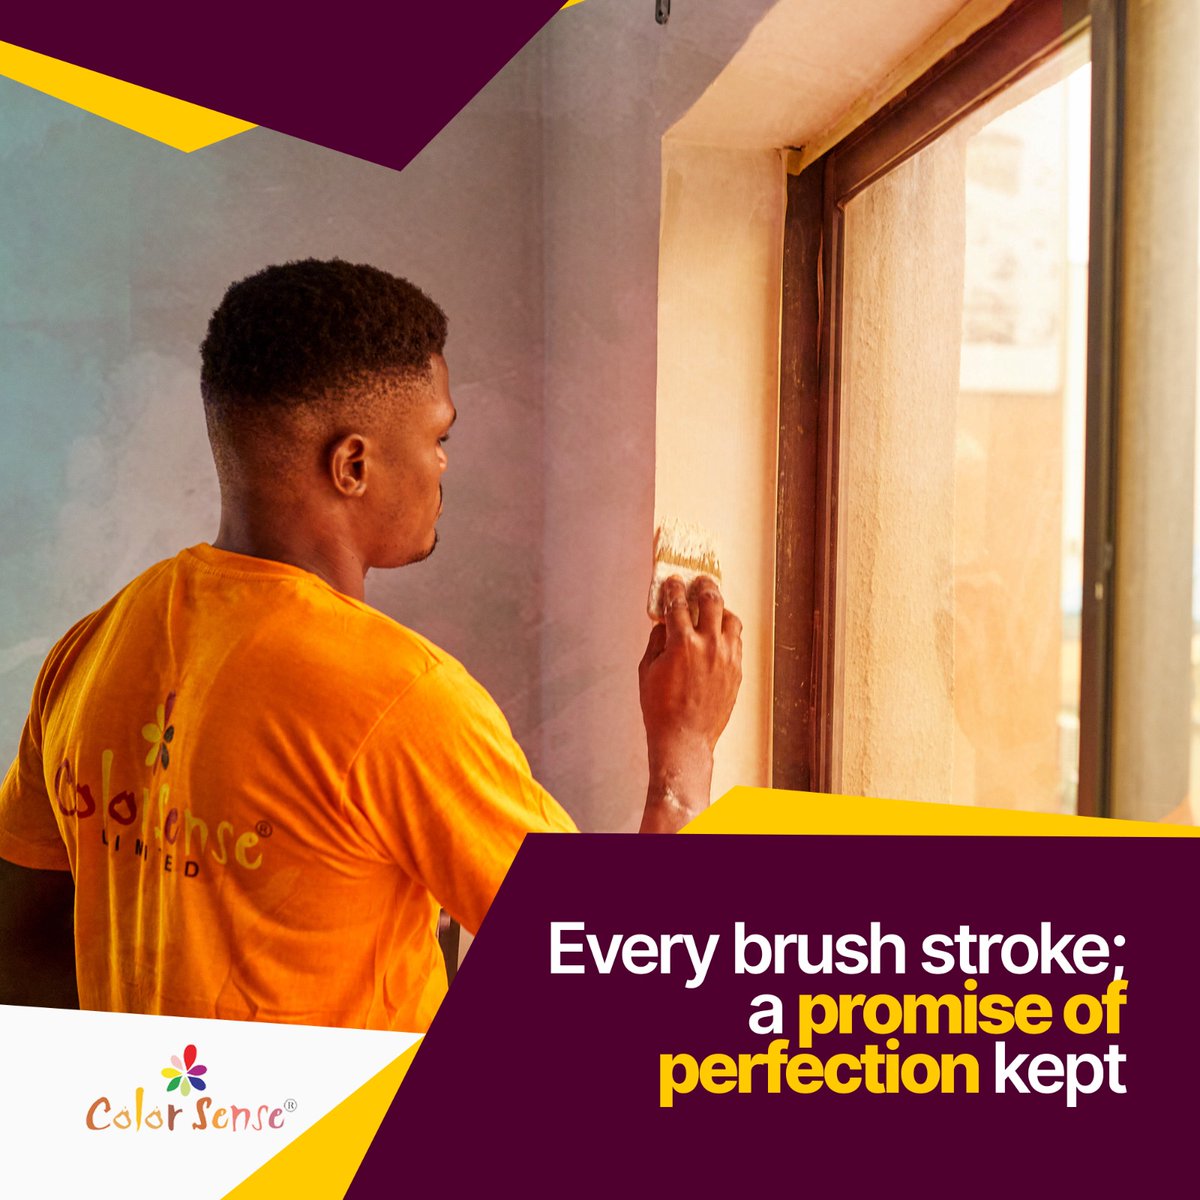 Experience excellence in painting services with our highly proficient and skilled team of applicators. 

Call +2348033037380 or +2348033086283 to book an appointment.

#colorsenselimited #professionalpainters #paintfinishes #painteffect #fauxfinishes #fauxeffectsproducts